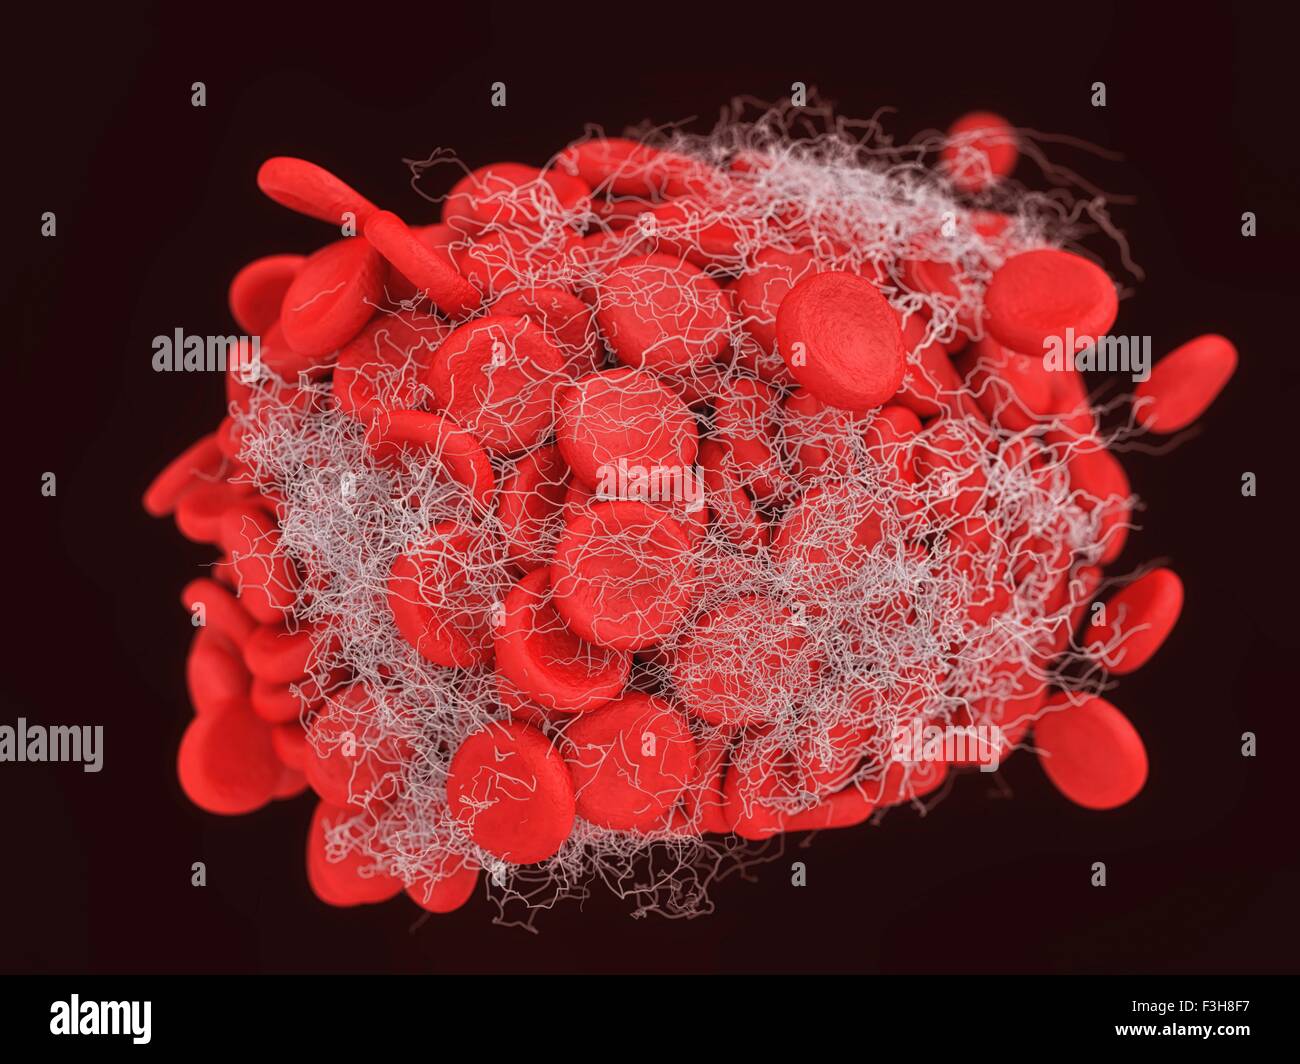 Illustration of a blood clot showing a clump of red blood cells intertwined in a fibrin mesh Stock Photo